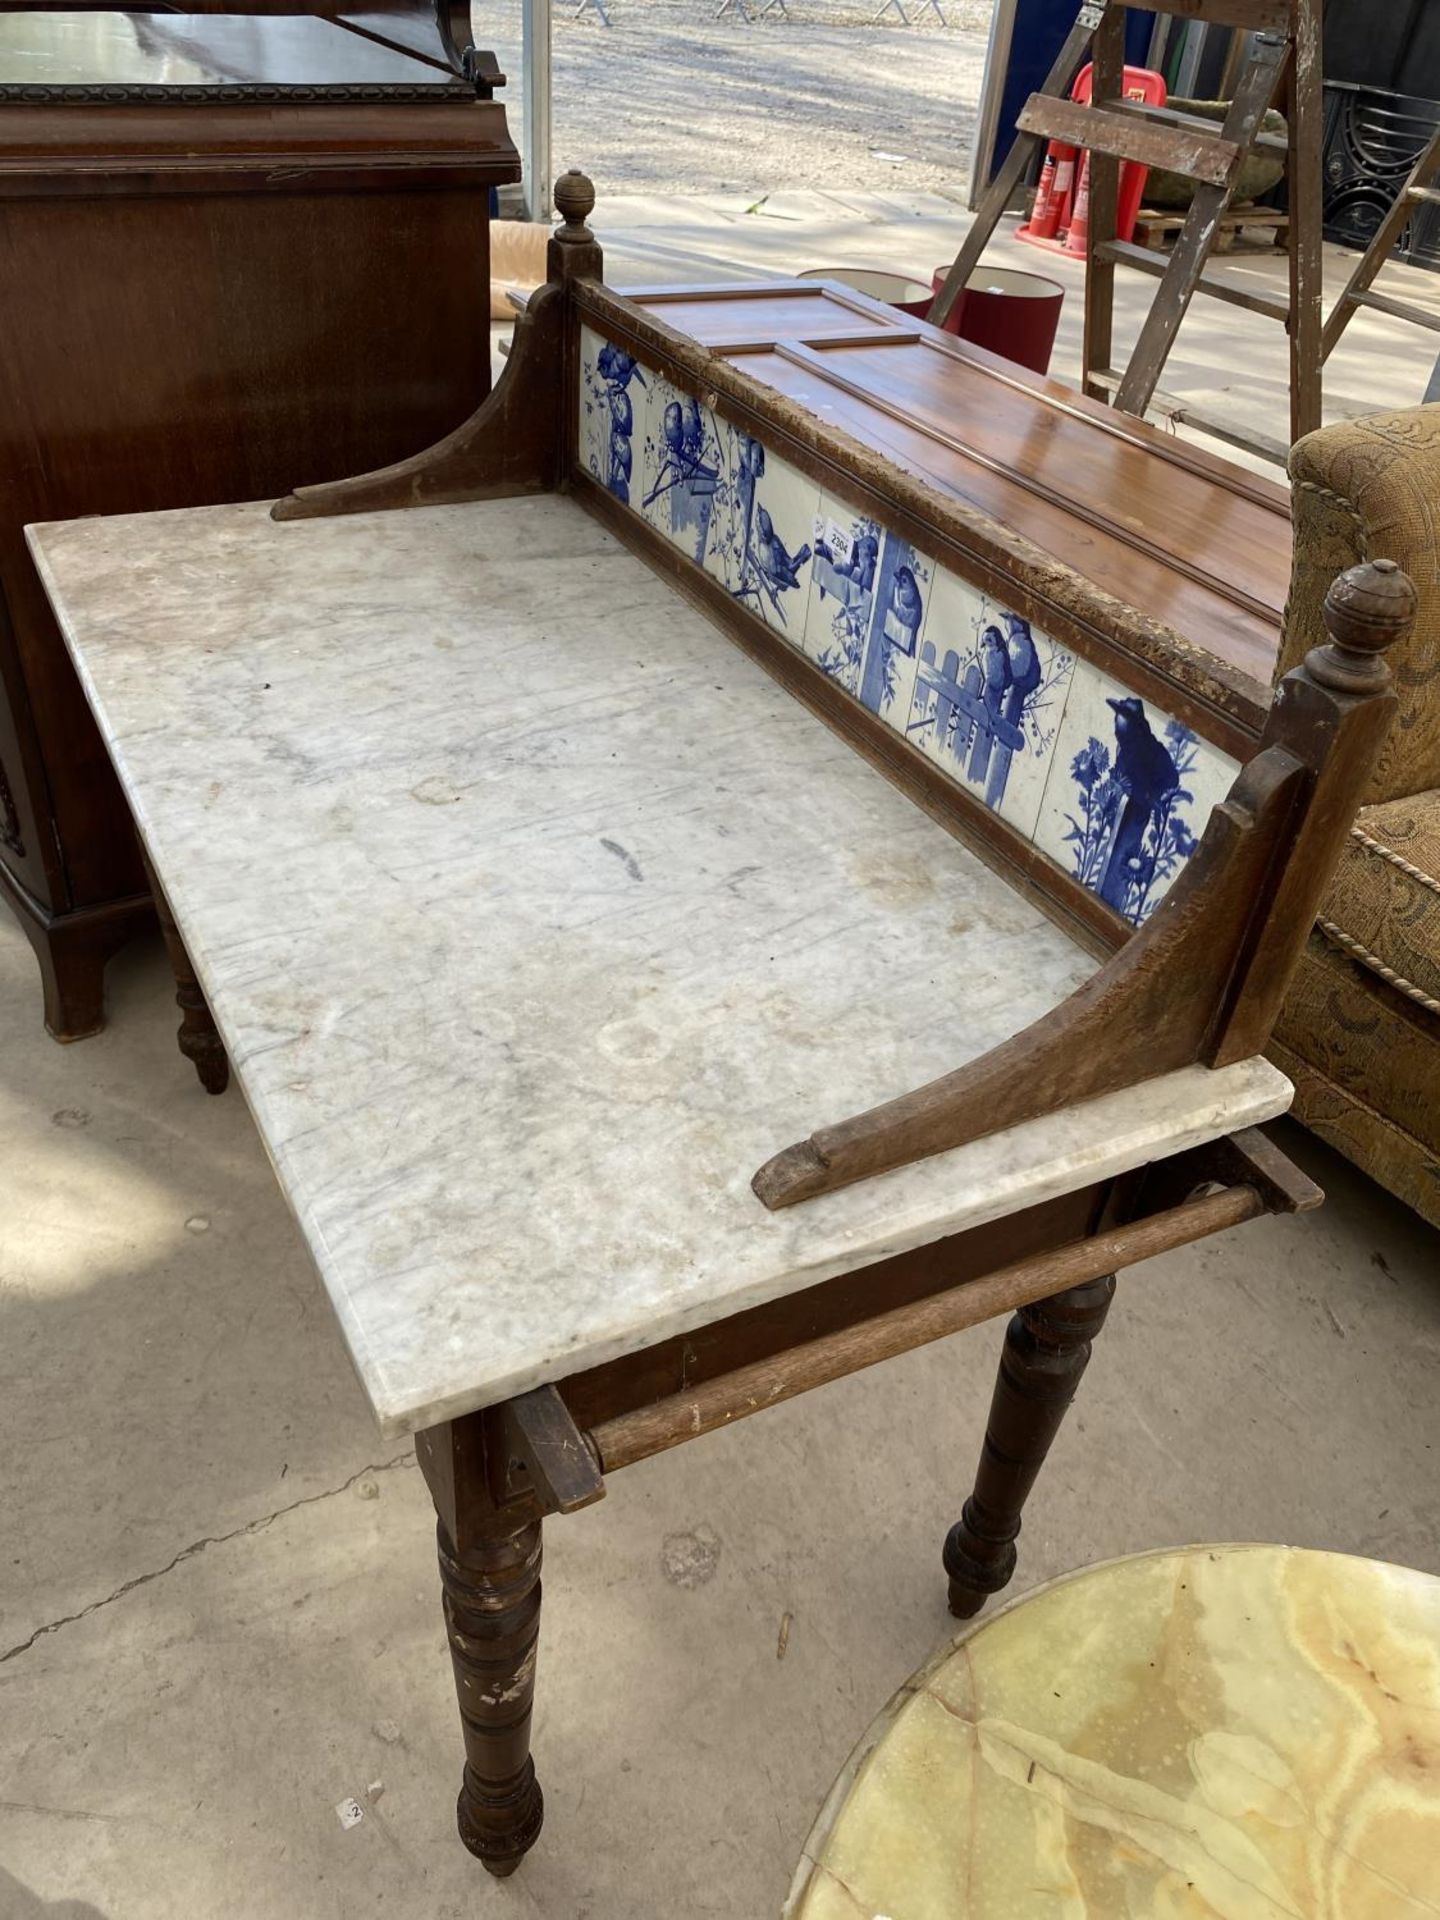 A VICTORIAN MARBLE TOPPED WASH STAND WITH TILED BACK 47" WIDE - Image 5 of 5